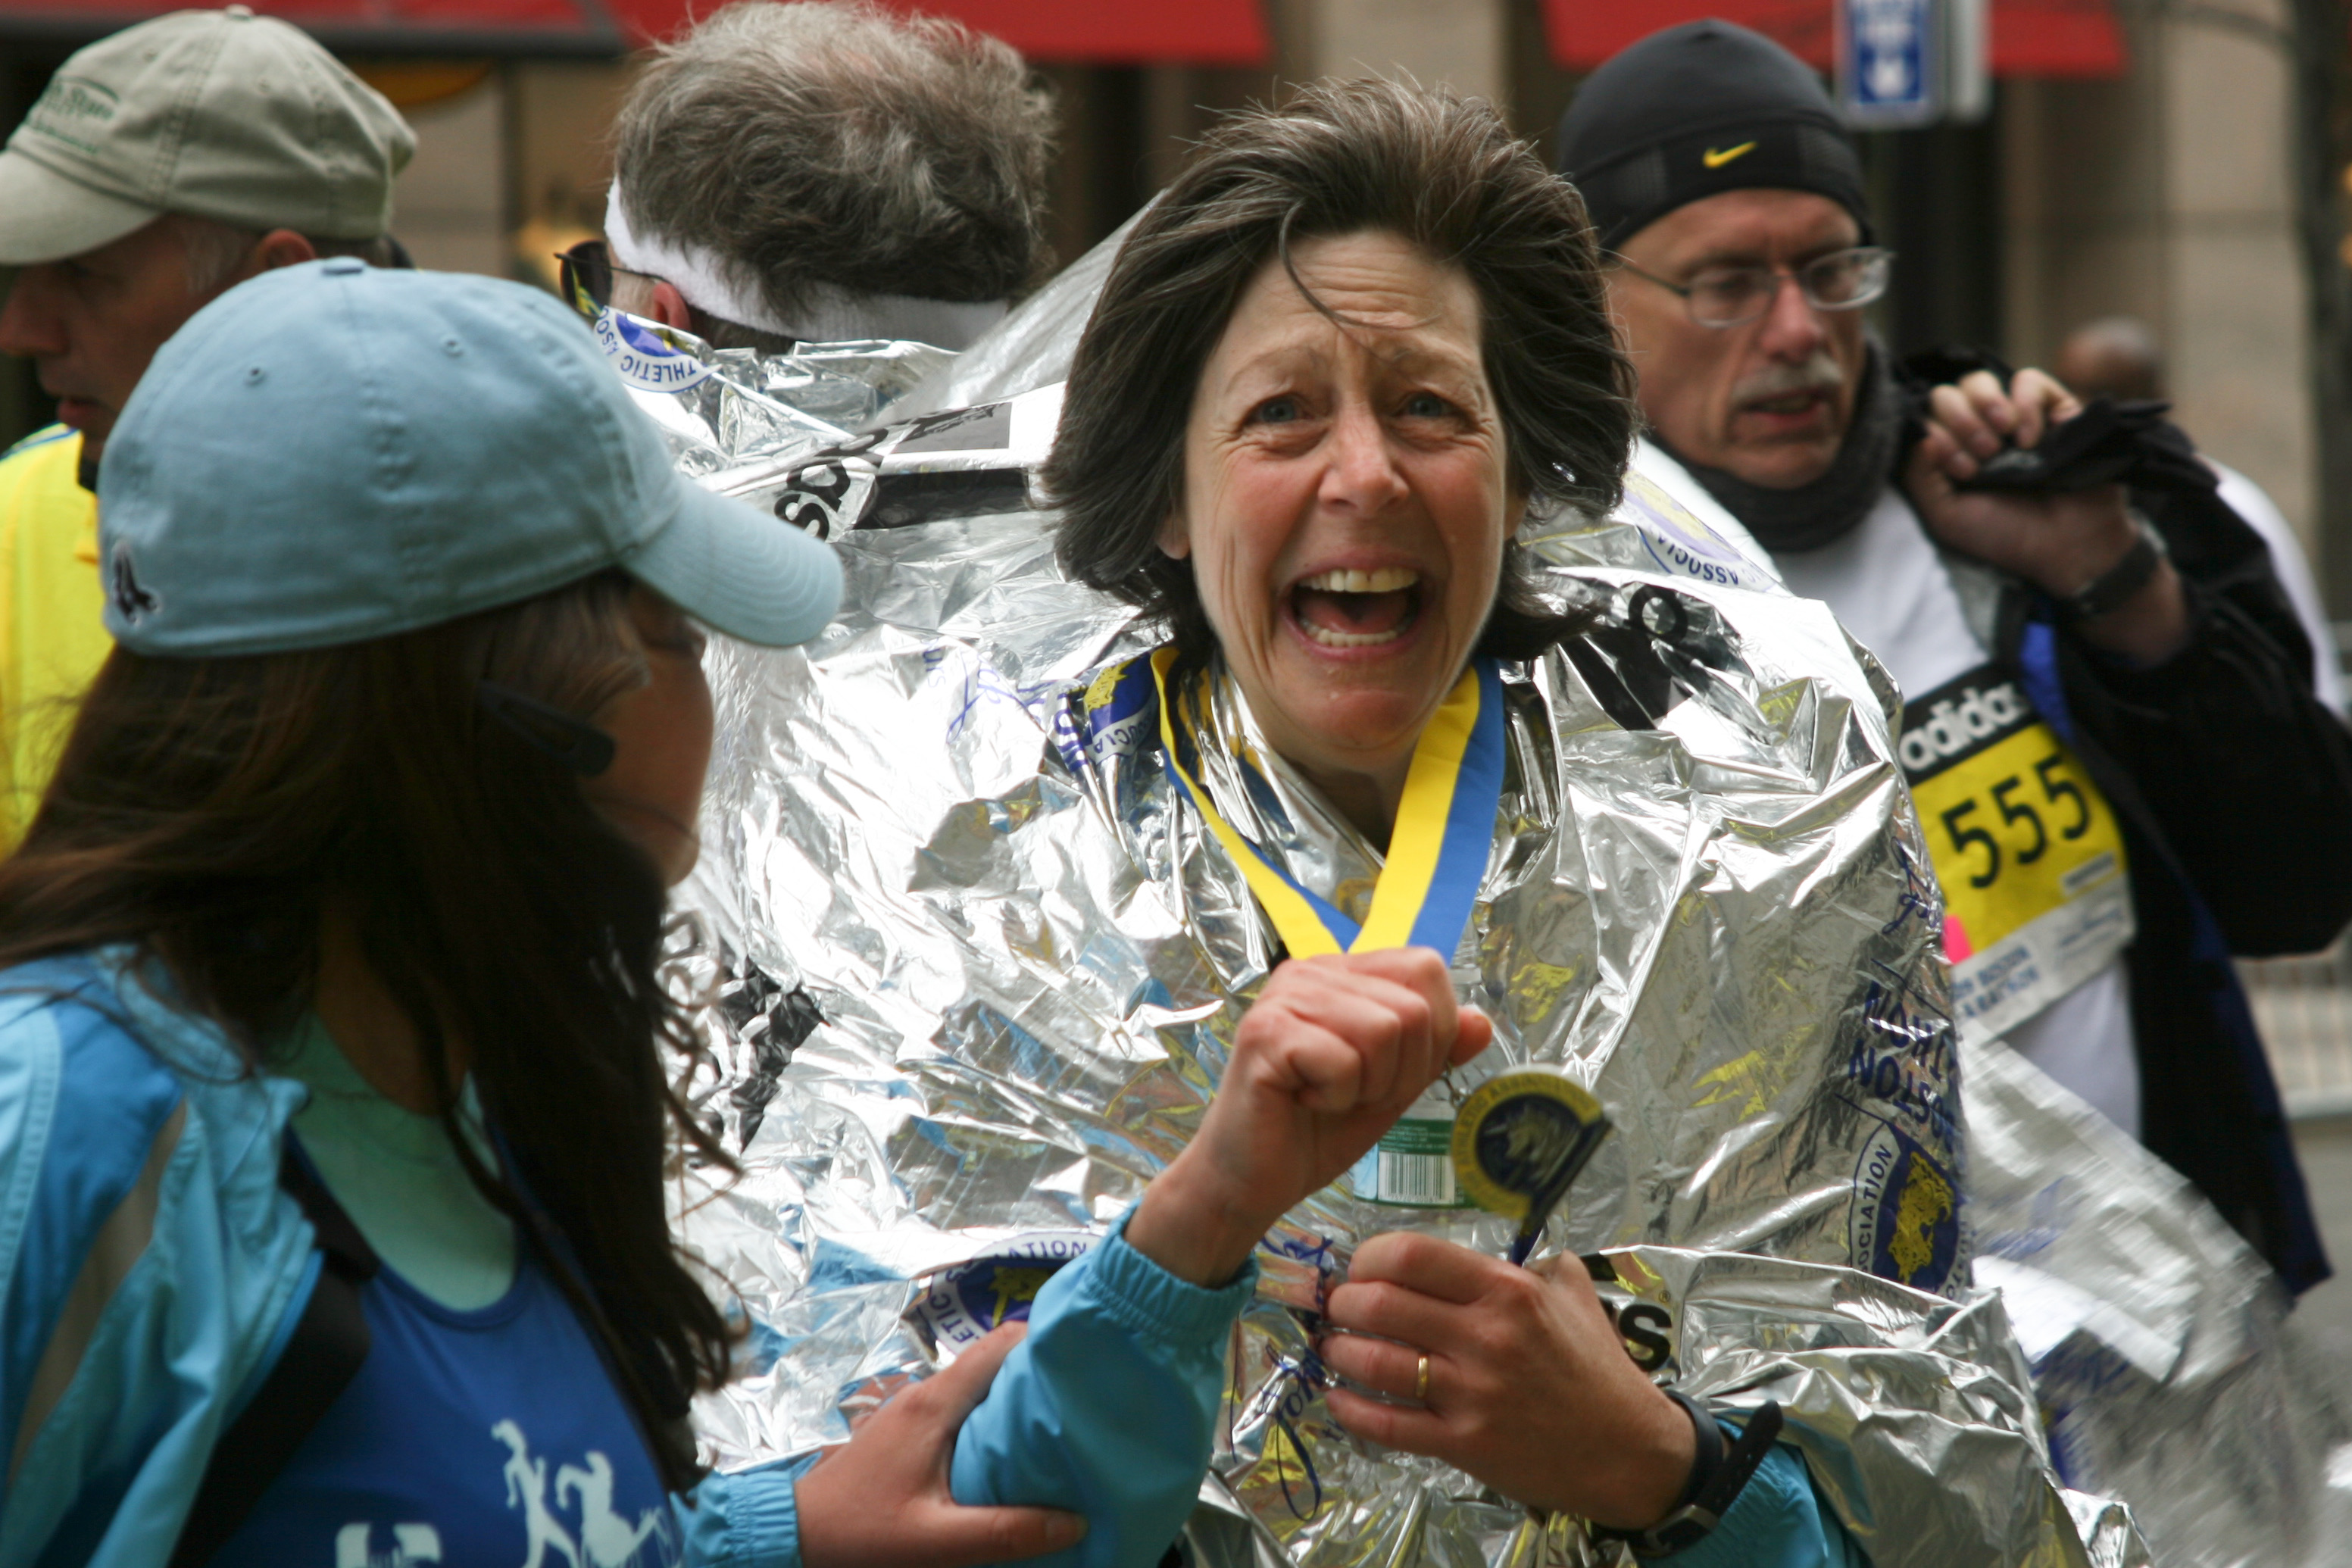 Mary with her Boston Marathon medal